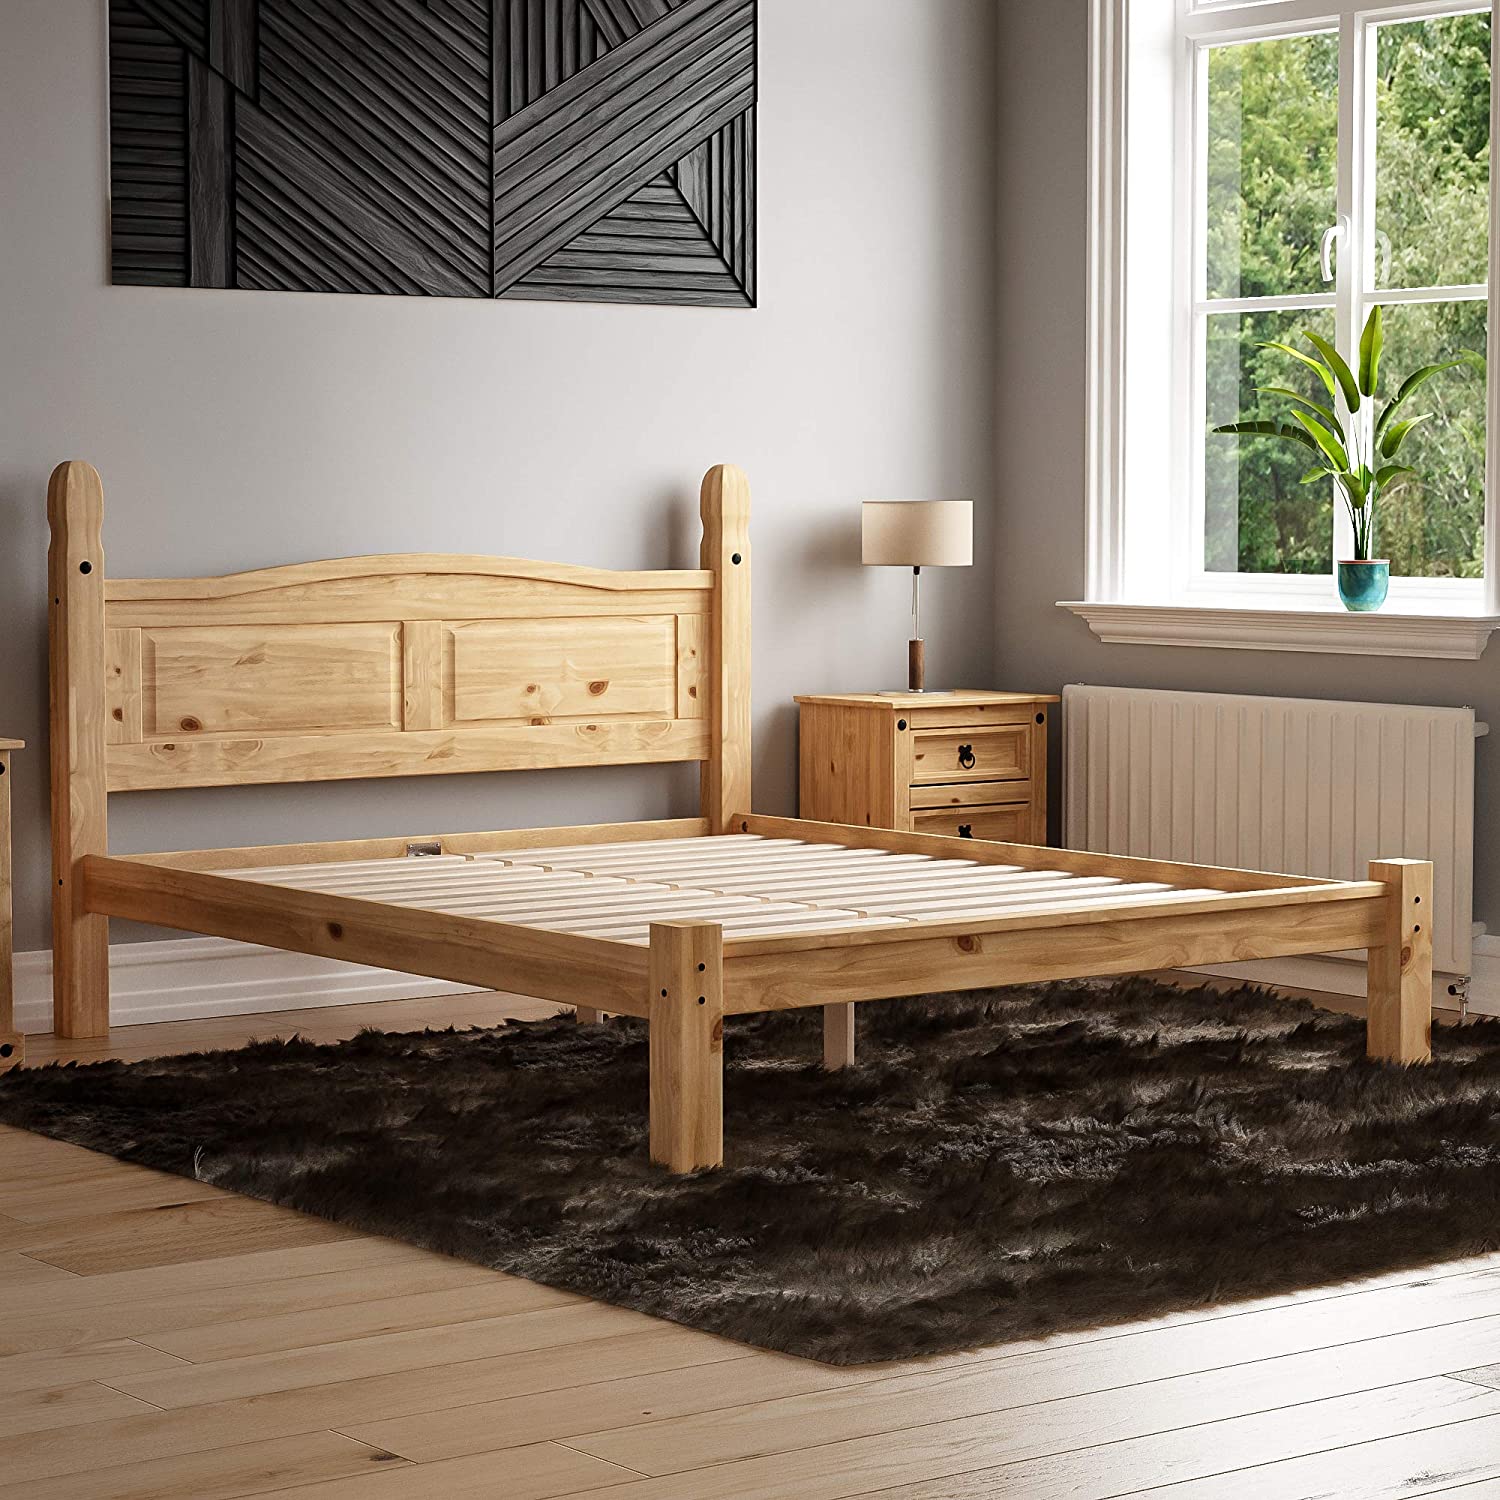 Select The Best King Size Bed Frames